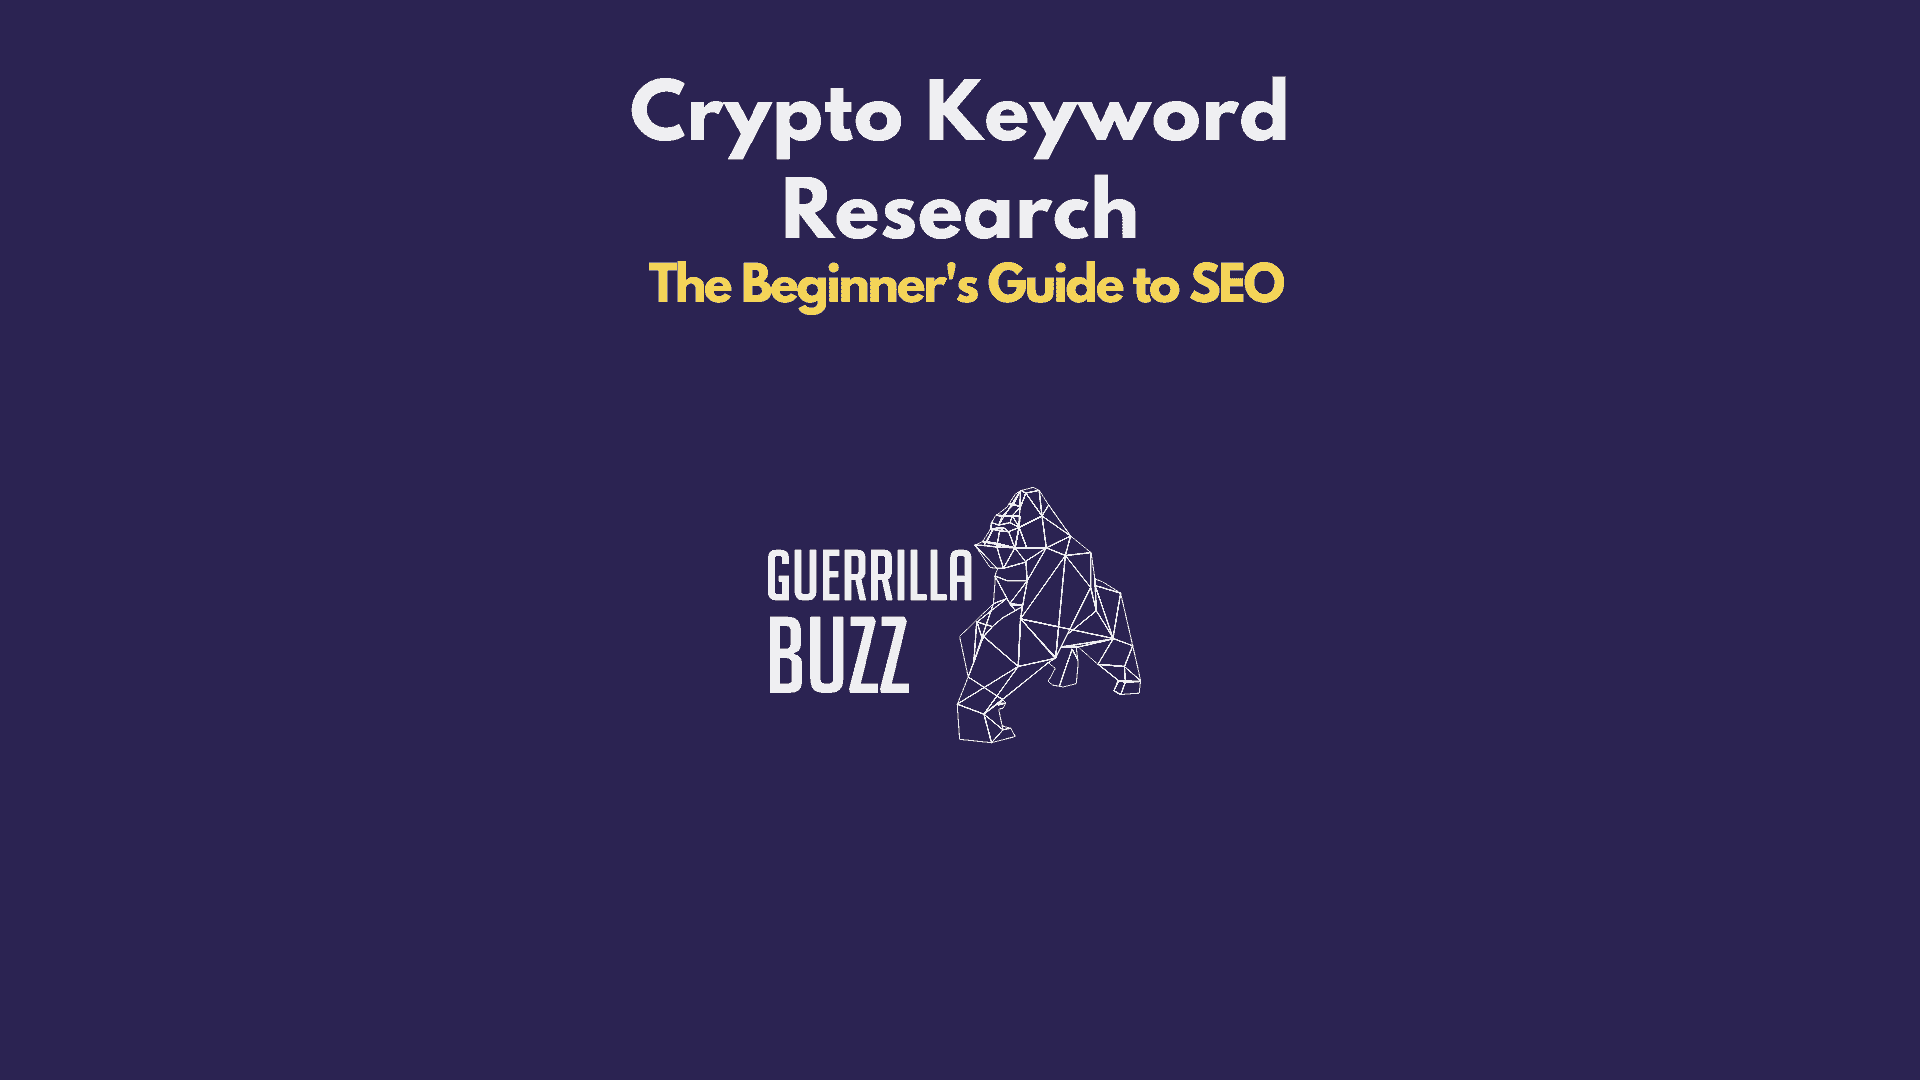 GuerrillaBuzz Crypto Keyword Research The Beginners Guide To SEO Min